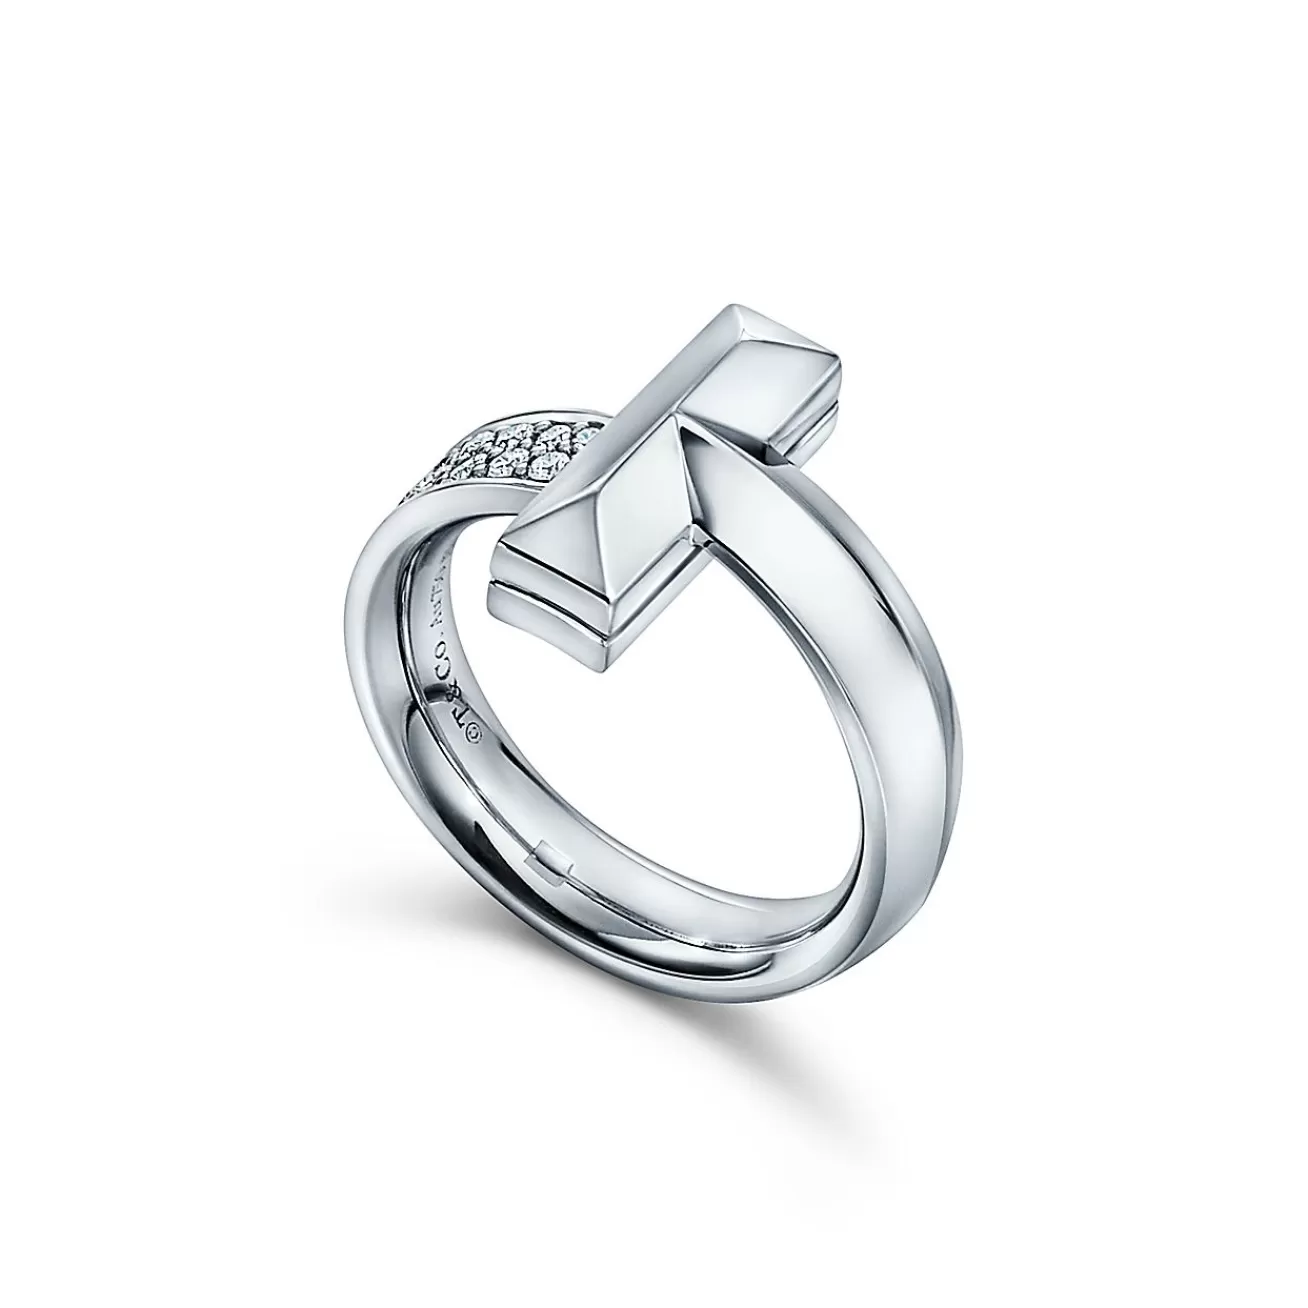 Tiffany & Co. Tiffany T T1 Ring in White Gold with Diamonds, 4.5 mm Wide | ^ Rings | Diamond Jewelry